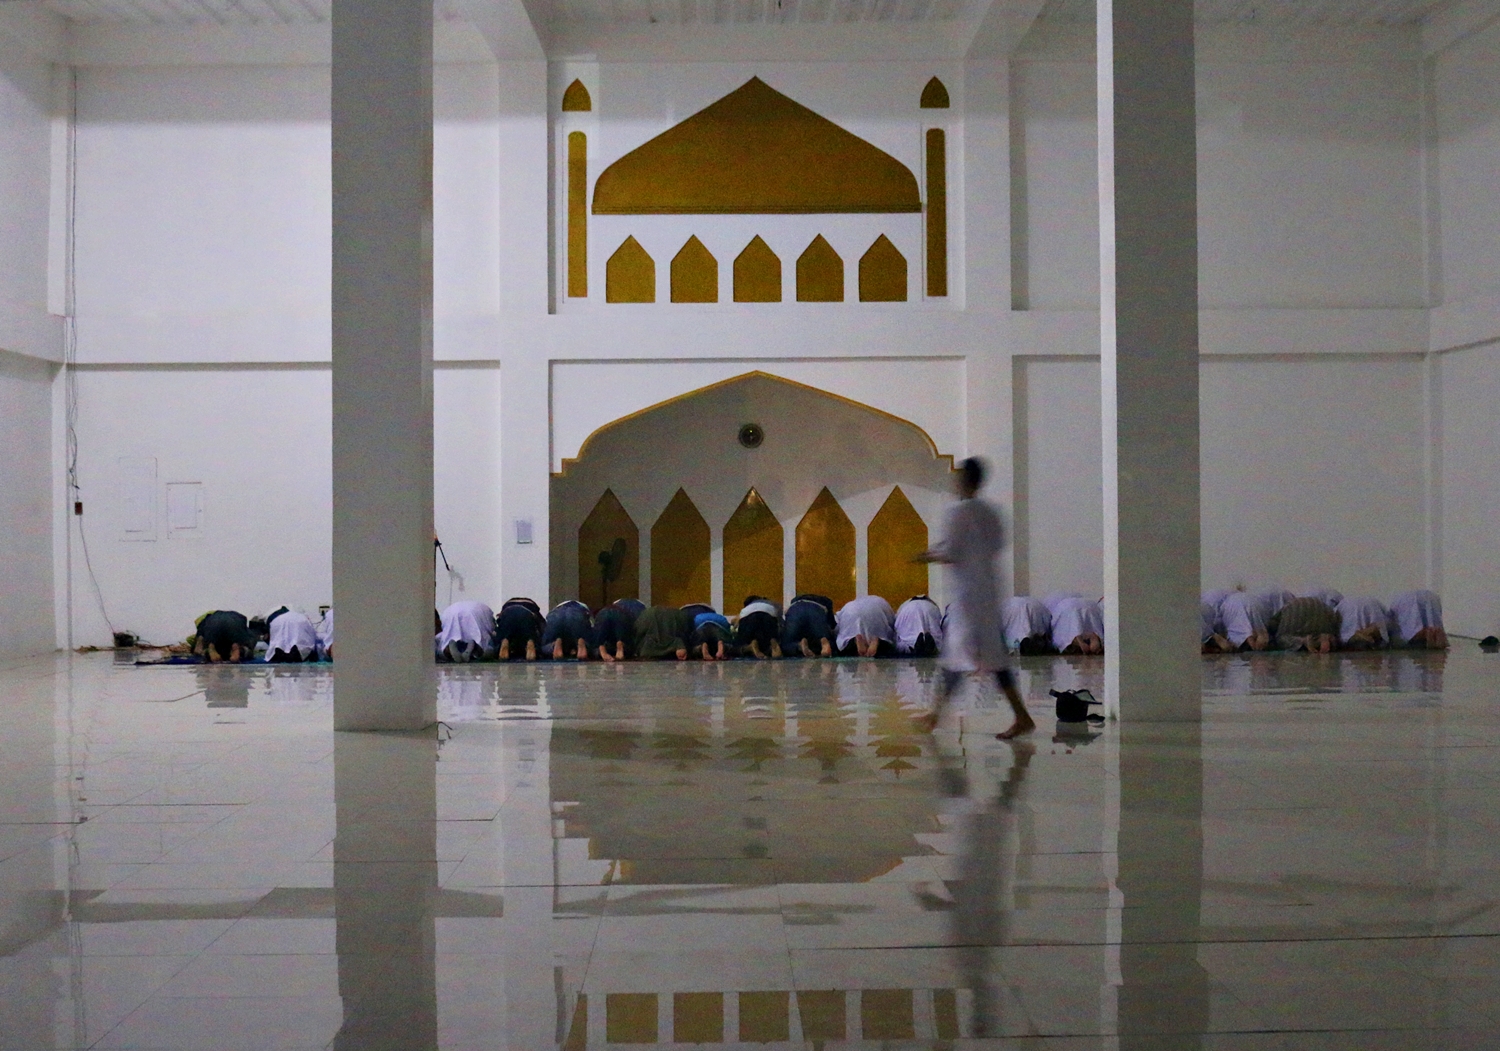 Faith Tourism launched in Province of Maguindanao through Mosque Tour Program 